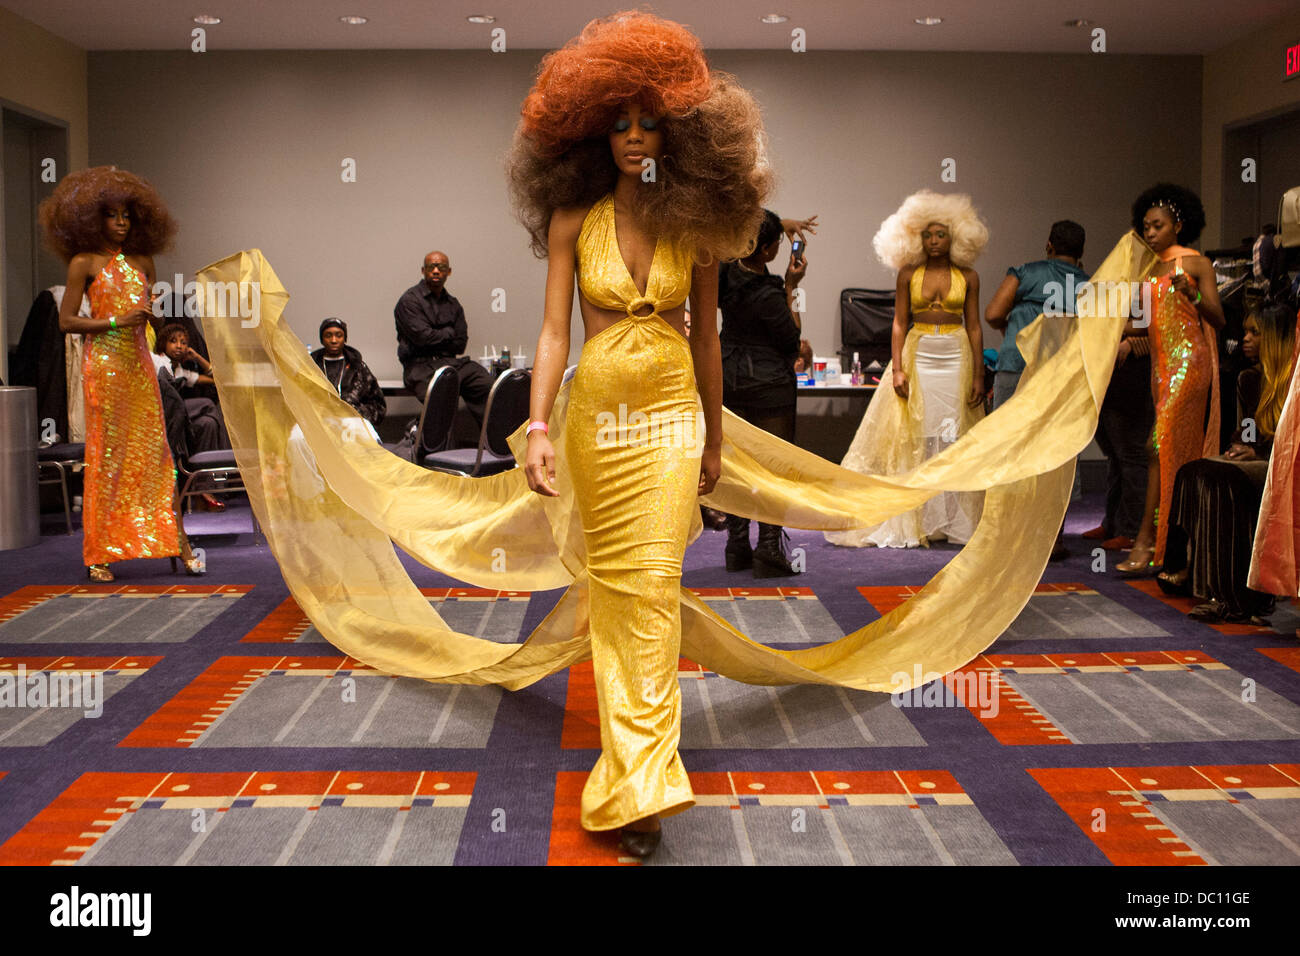 Afro hair fashion show. Banque D'Images